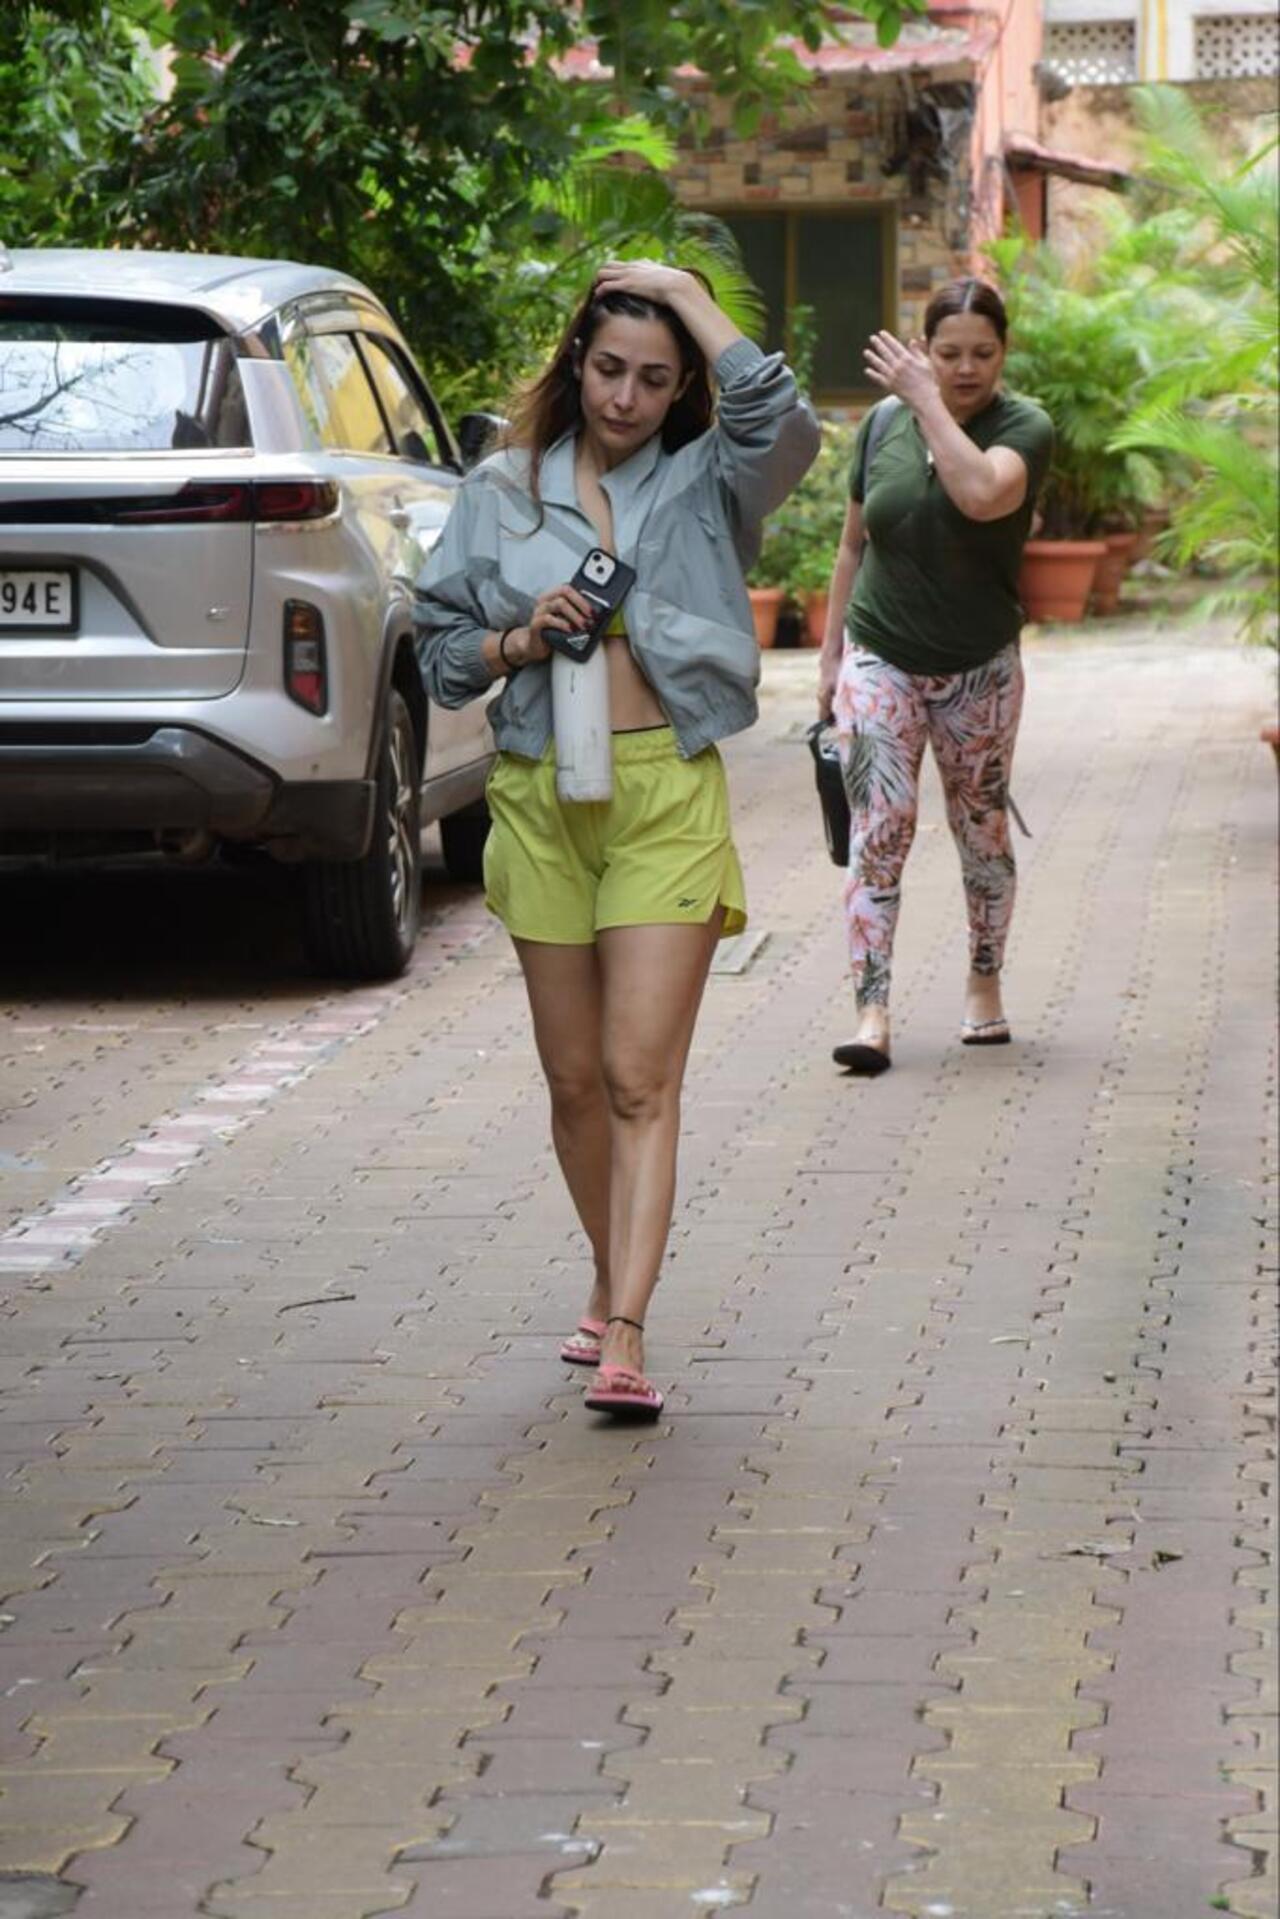 Malaika Arora looked refreshing as always. She was snapped wearing smart green shorts paired with a grey jacket